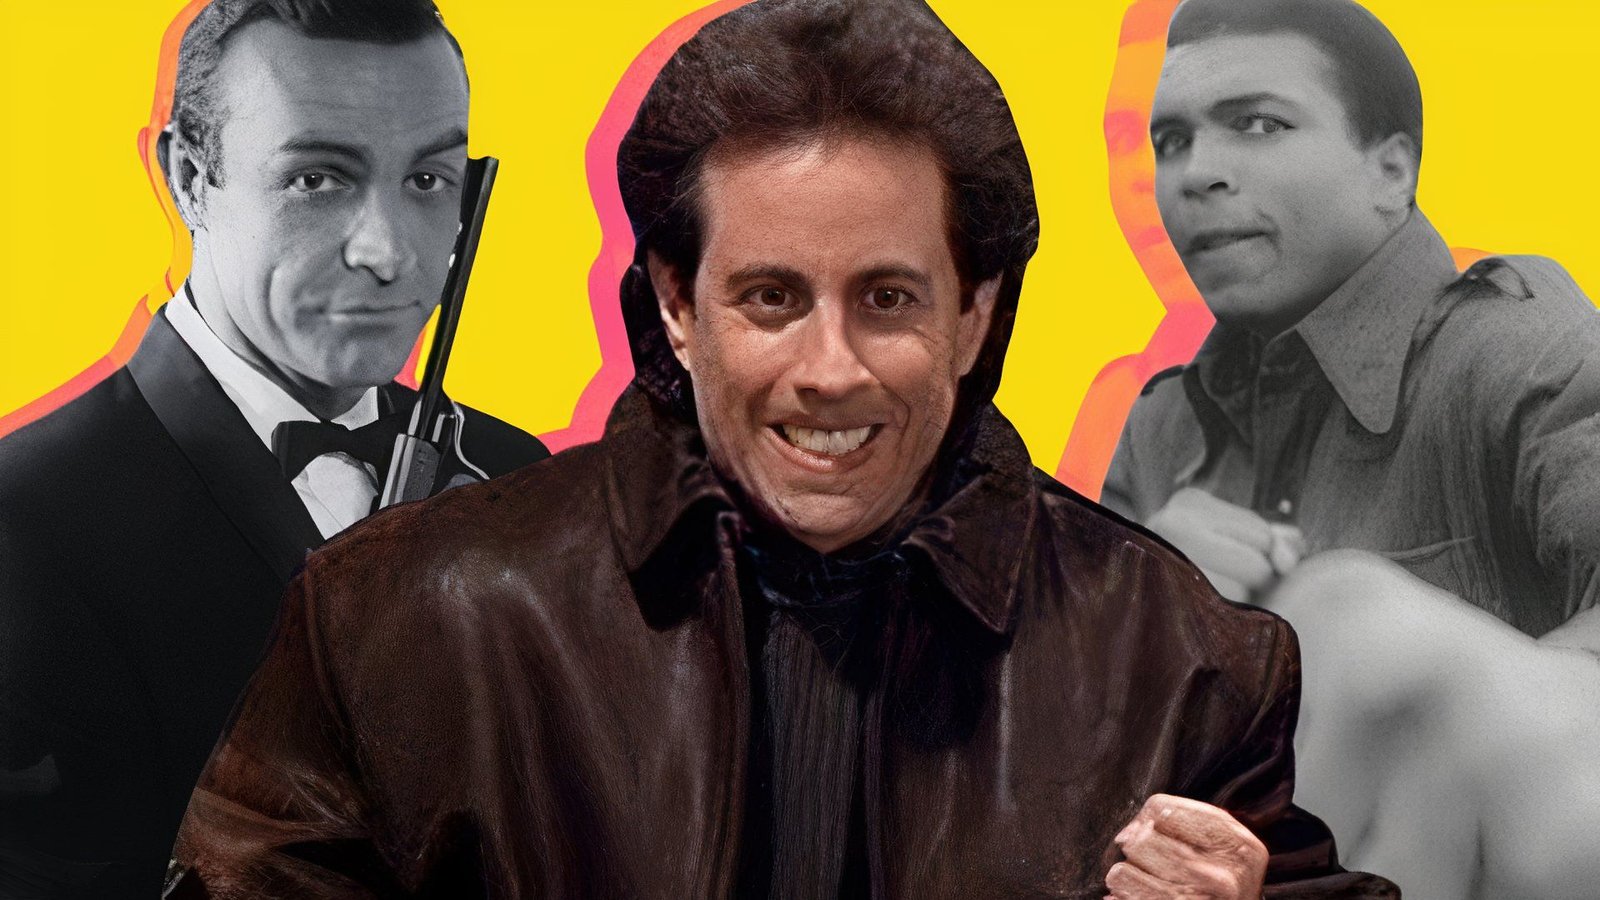 Jerry Seinfeld Says He Misses 'Dominant Masculinity' & 'Always Wanted to Be a Real Man'